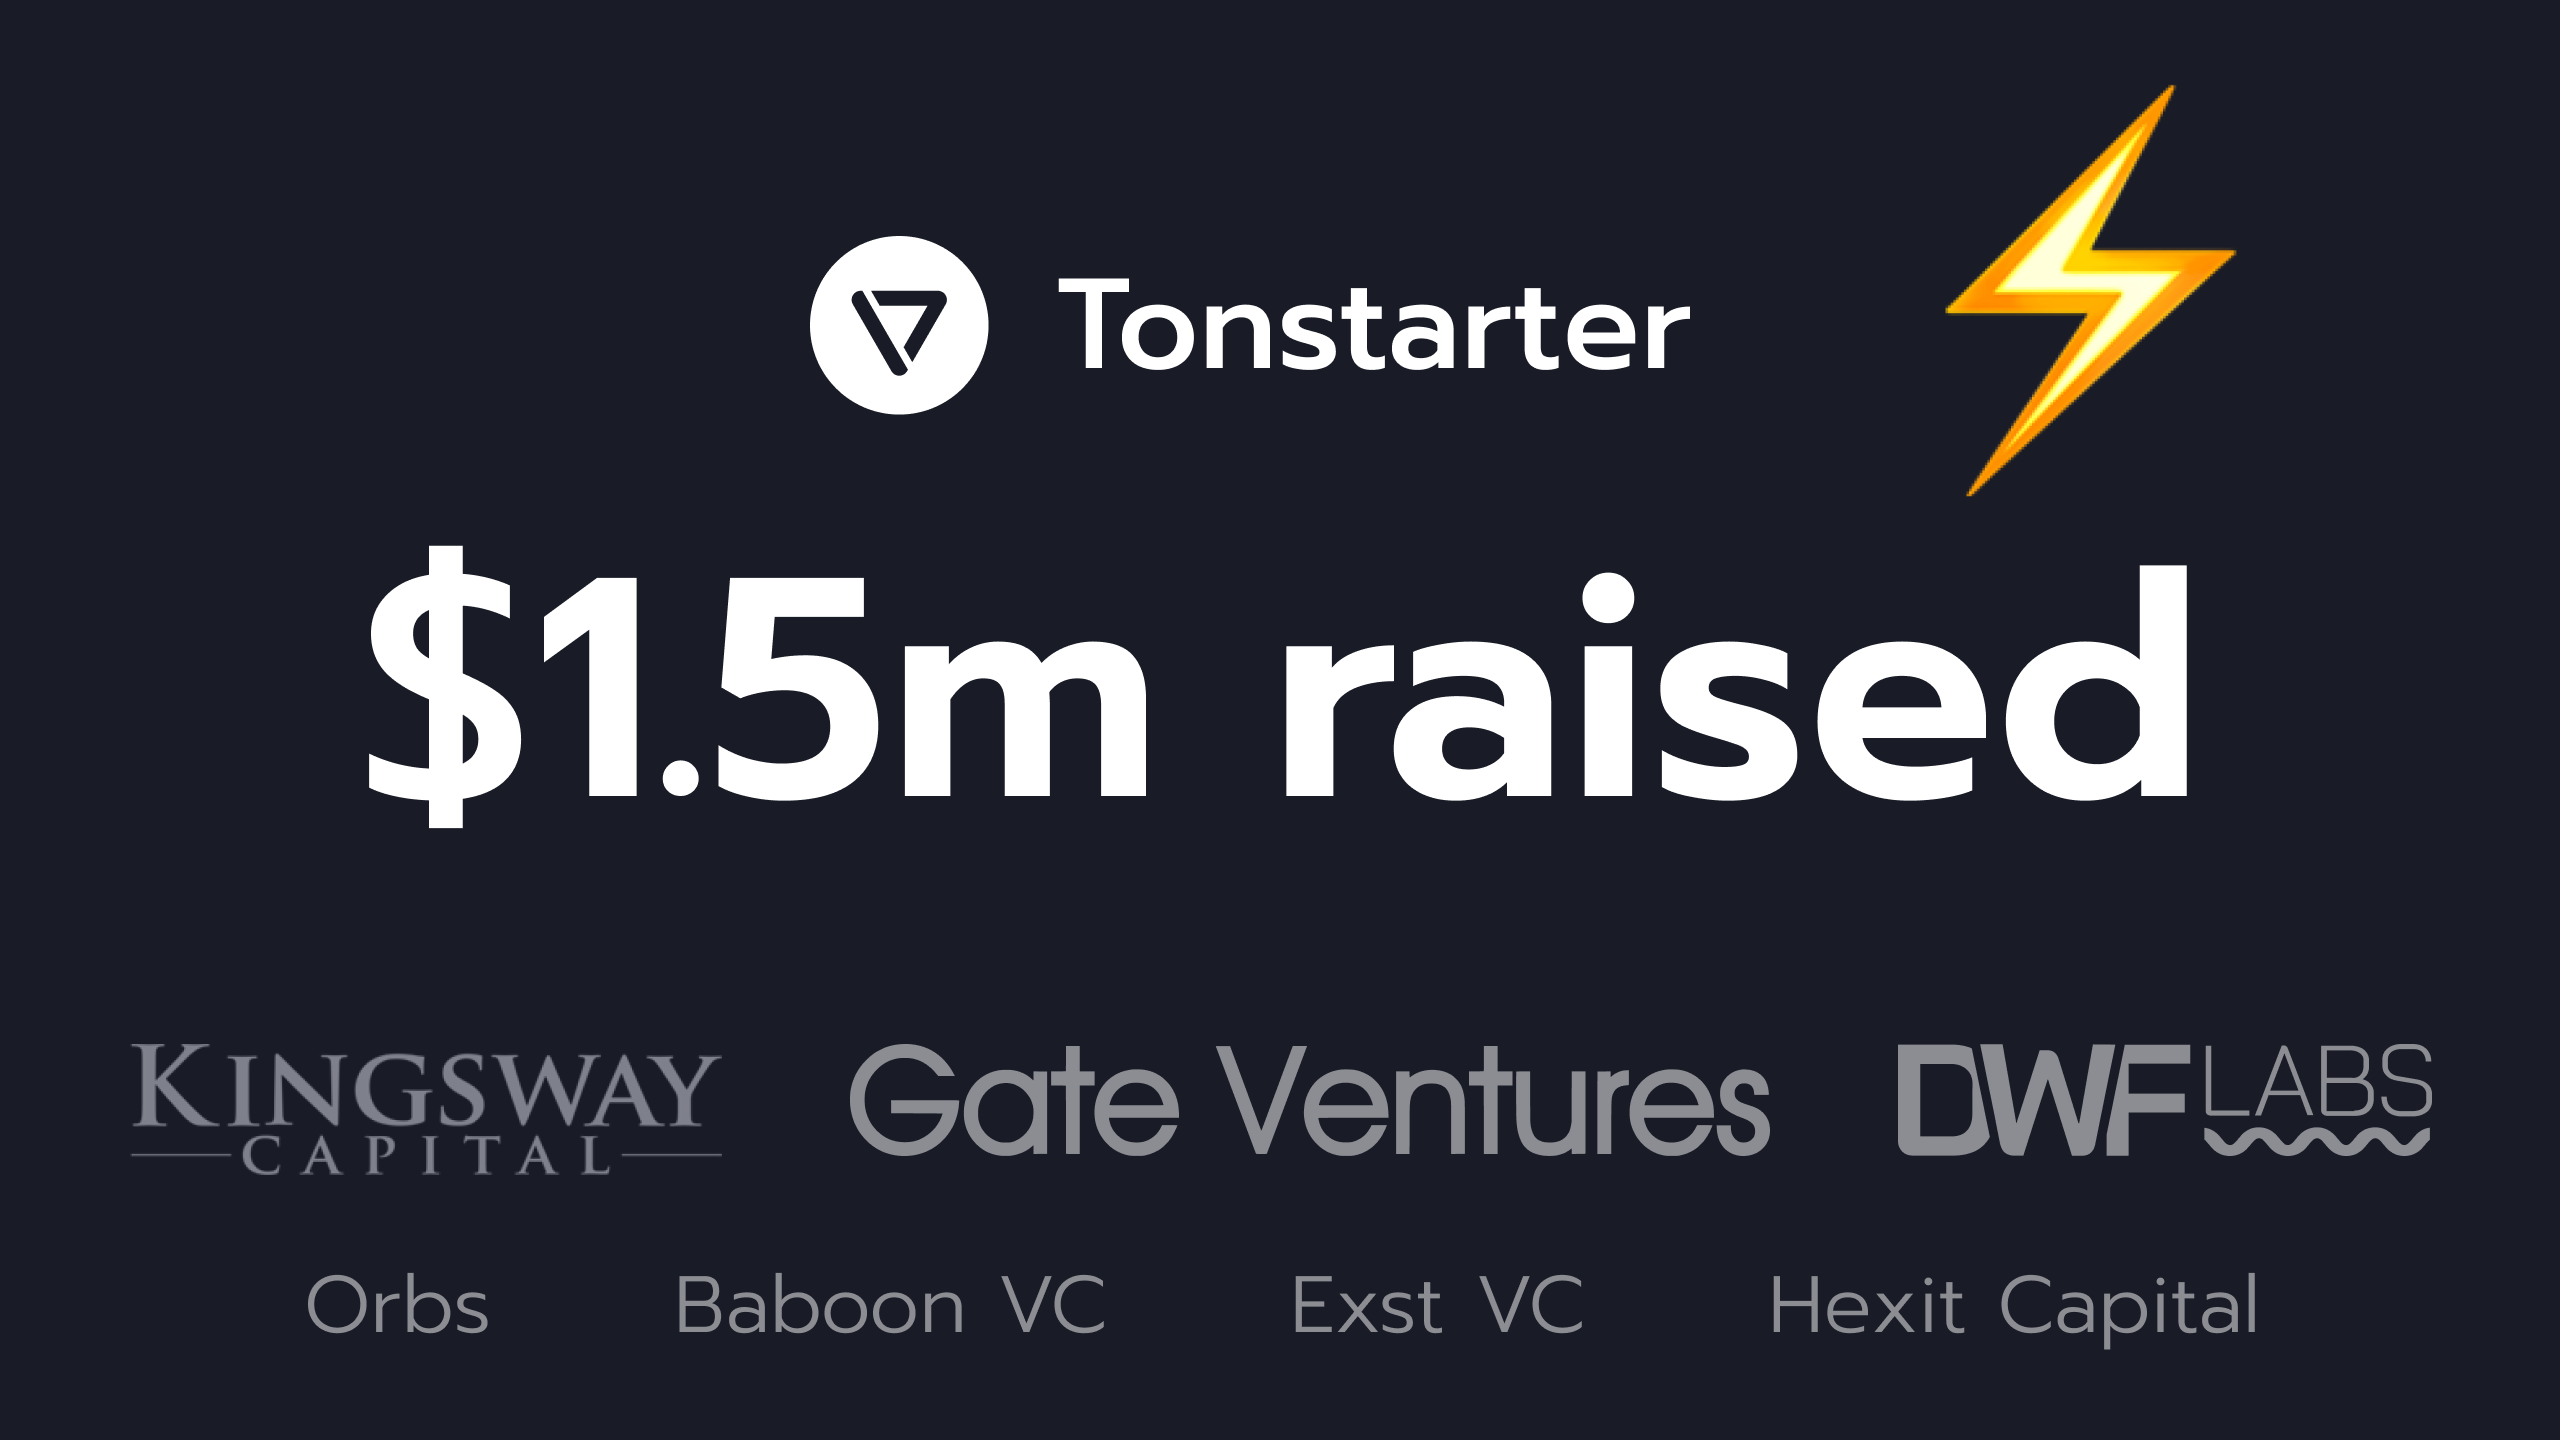 , Tonstarter Closes $1.5 million Seed Round as Primary Fundraising Platform for The Open Network (TON)